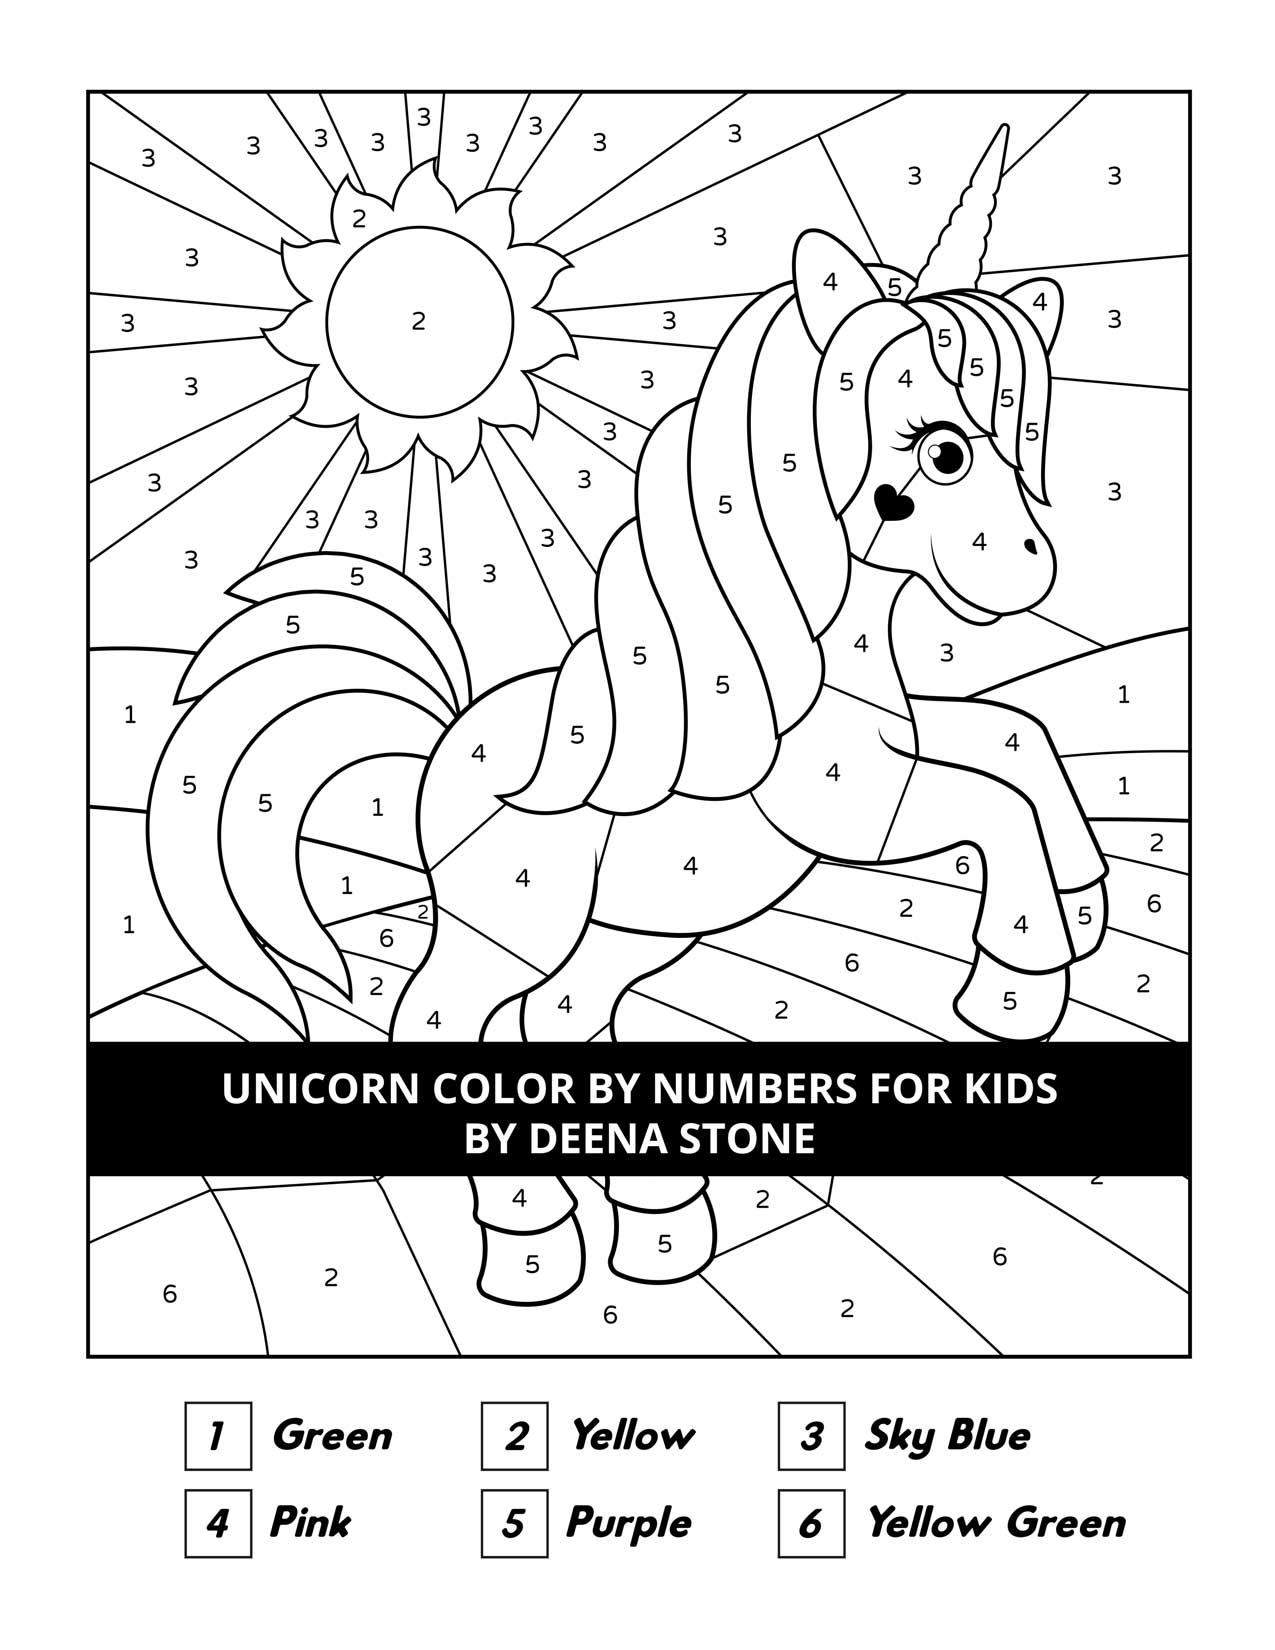 unicorn-color-by-numbers-for-kids-deena-stone